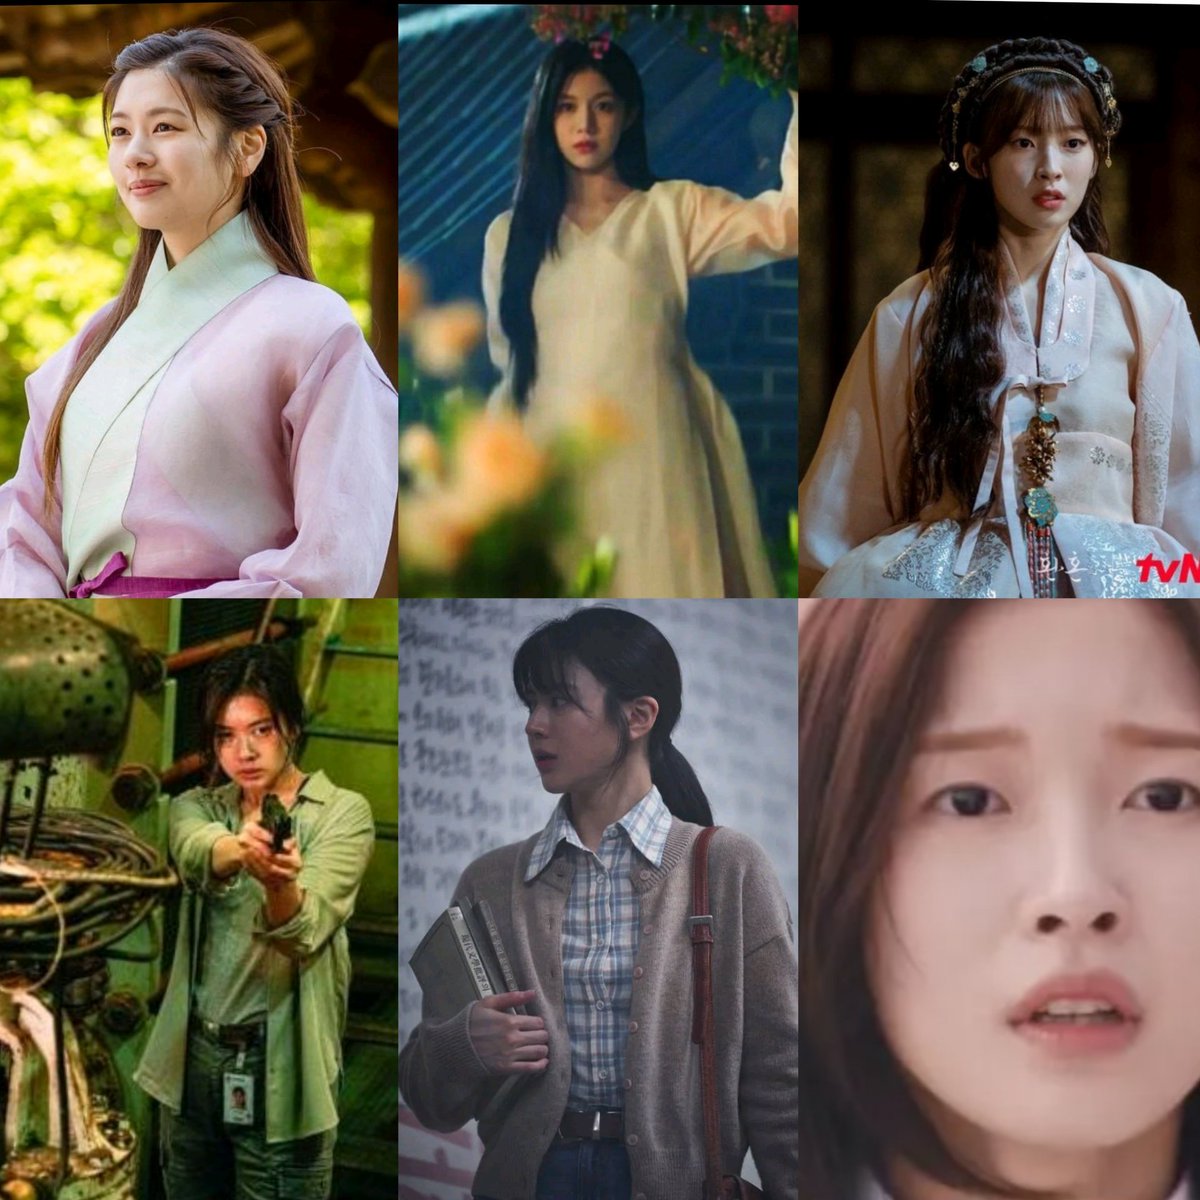 Congratulations to the AOS ladies for being nominated at the 43rd blue dragon film awards
Isn't so cool...hope they all attend the award show🤩
#JungSoMin nominated for best actress (#ProjectWolfHunting)
#GoYounJung (#Hunt) and #Arin (#UrbanMyth) nominated for best new actress